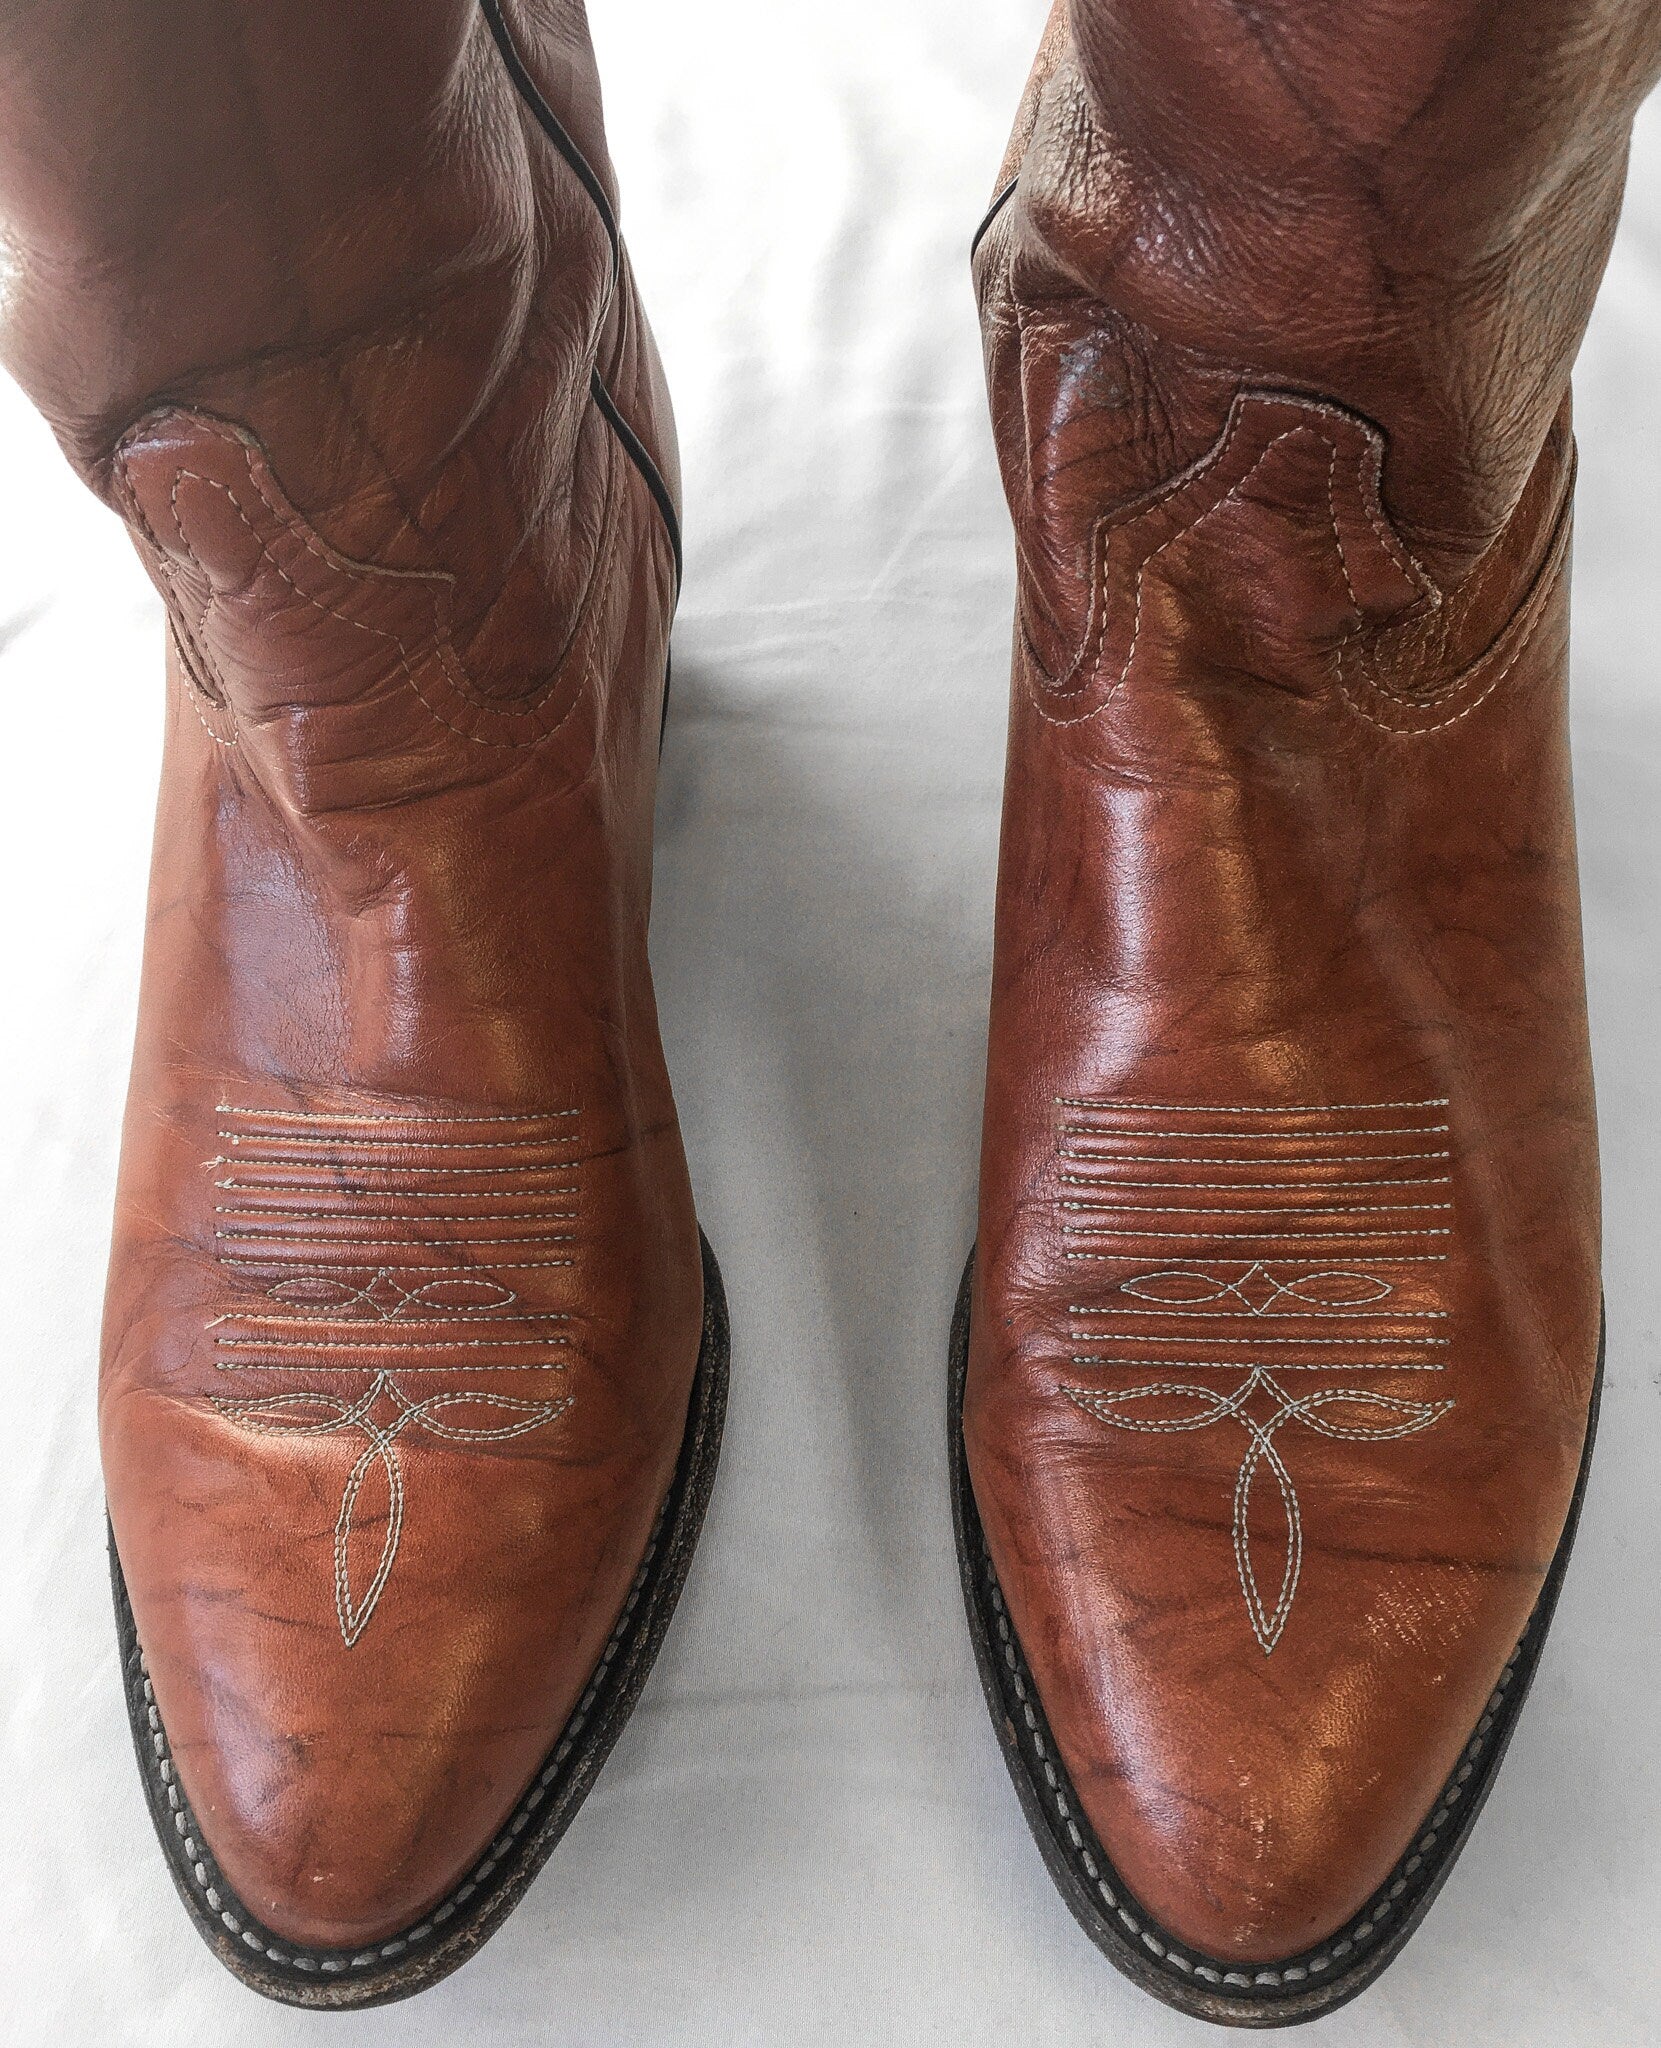 Vintage Tony Lama Warm Toned Brown Leather Embroidered Boots, Men's Sz. 9.5, Vintage Tony Lama Cowboy Boots